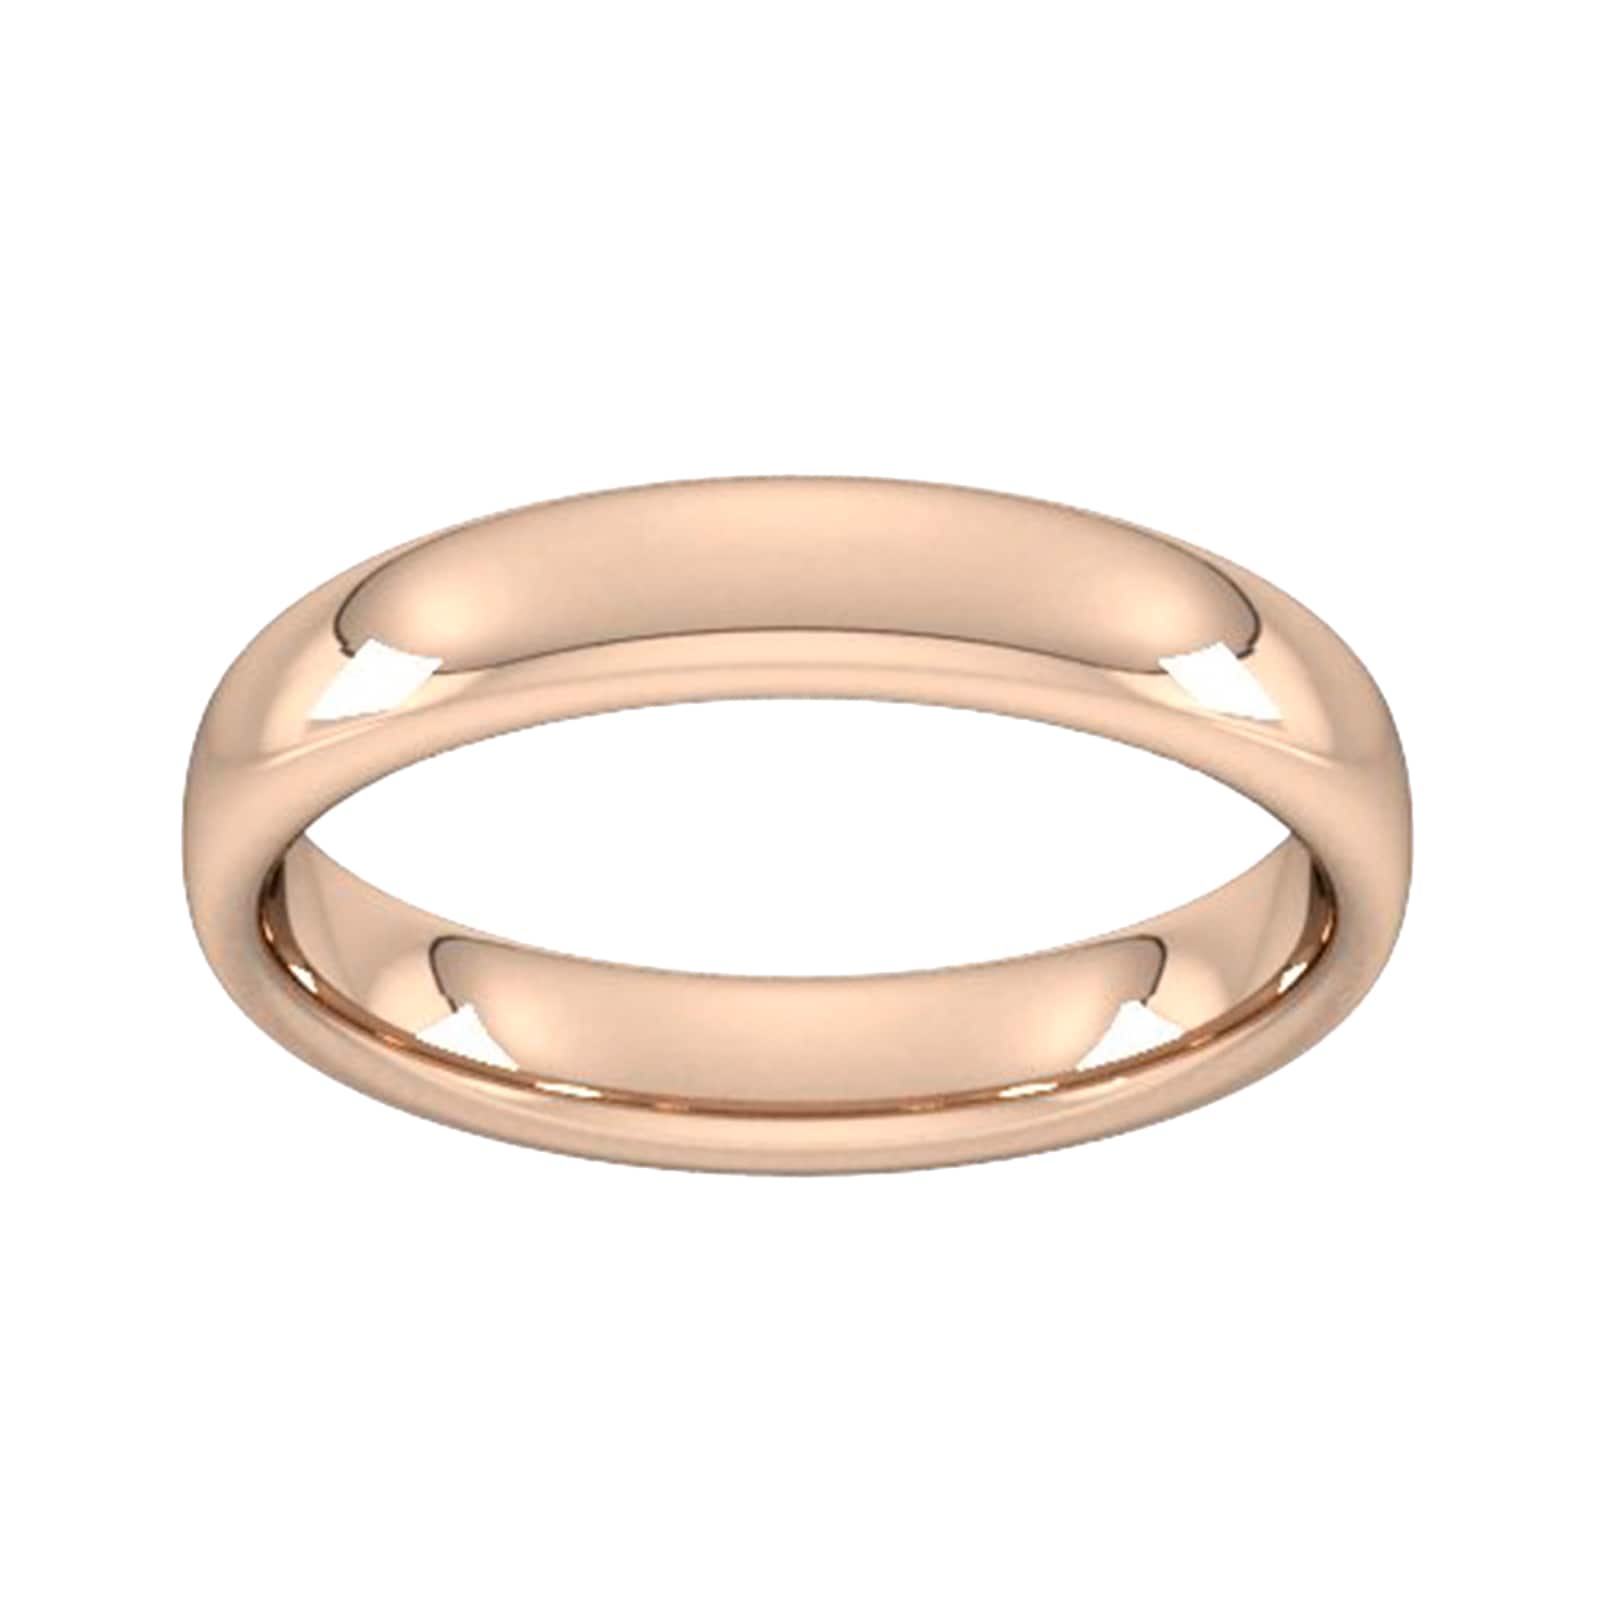 4mm Slight Court Heavy Wedding Ring In 18 Carat Rose Gold - Ring Size P